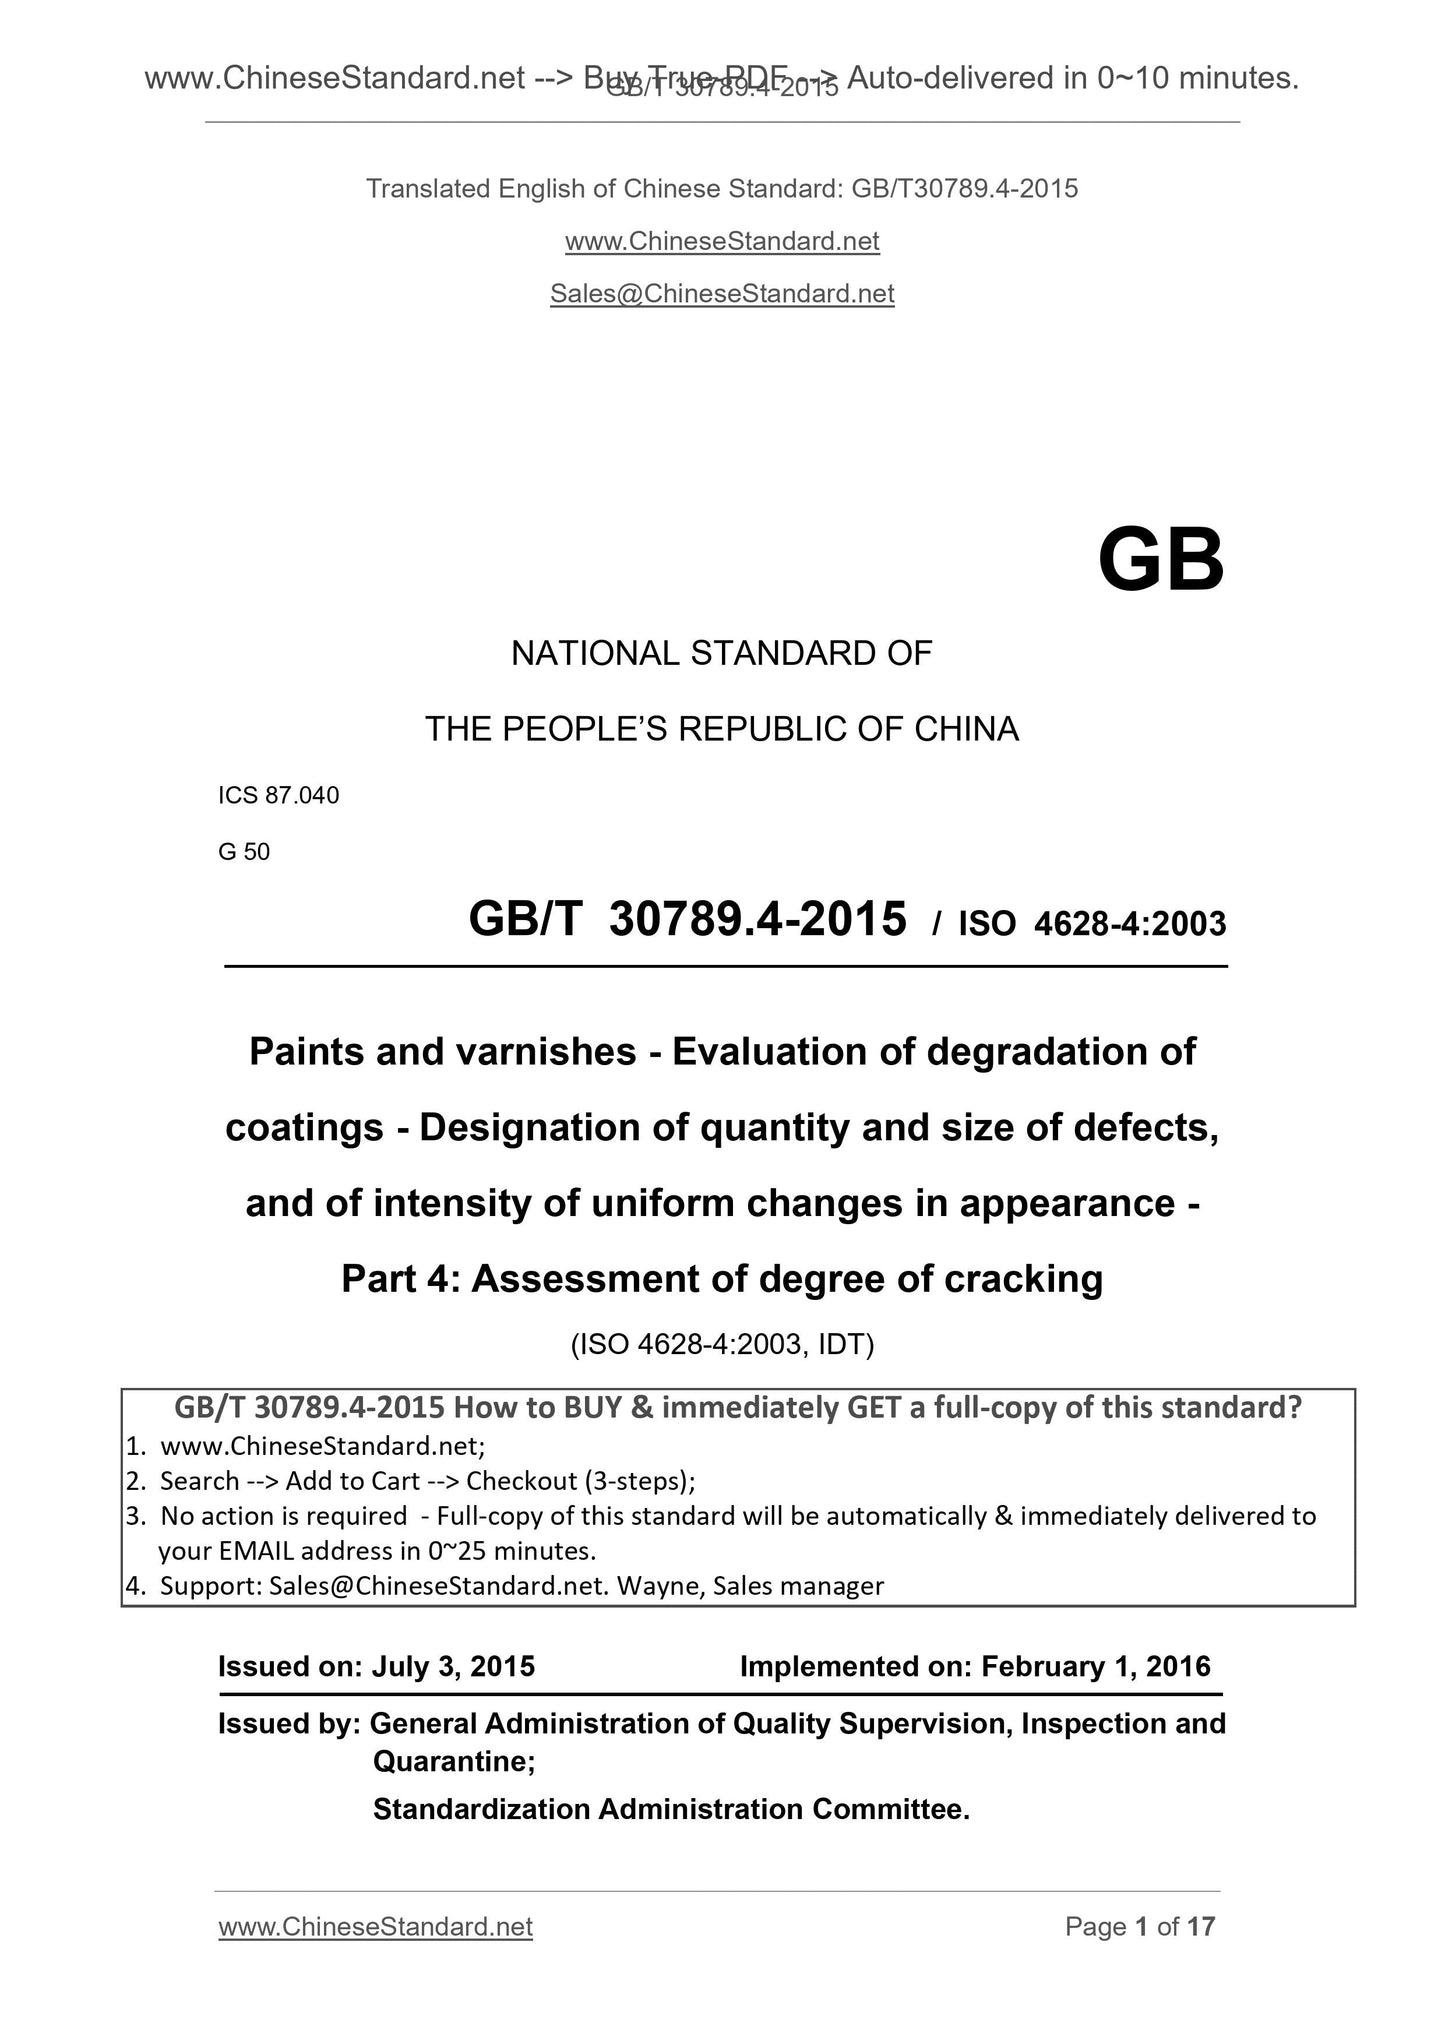 GB/T 30789.4-2015 Page 1